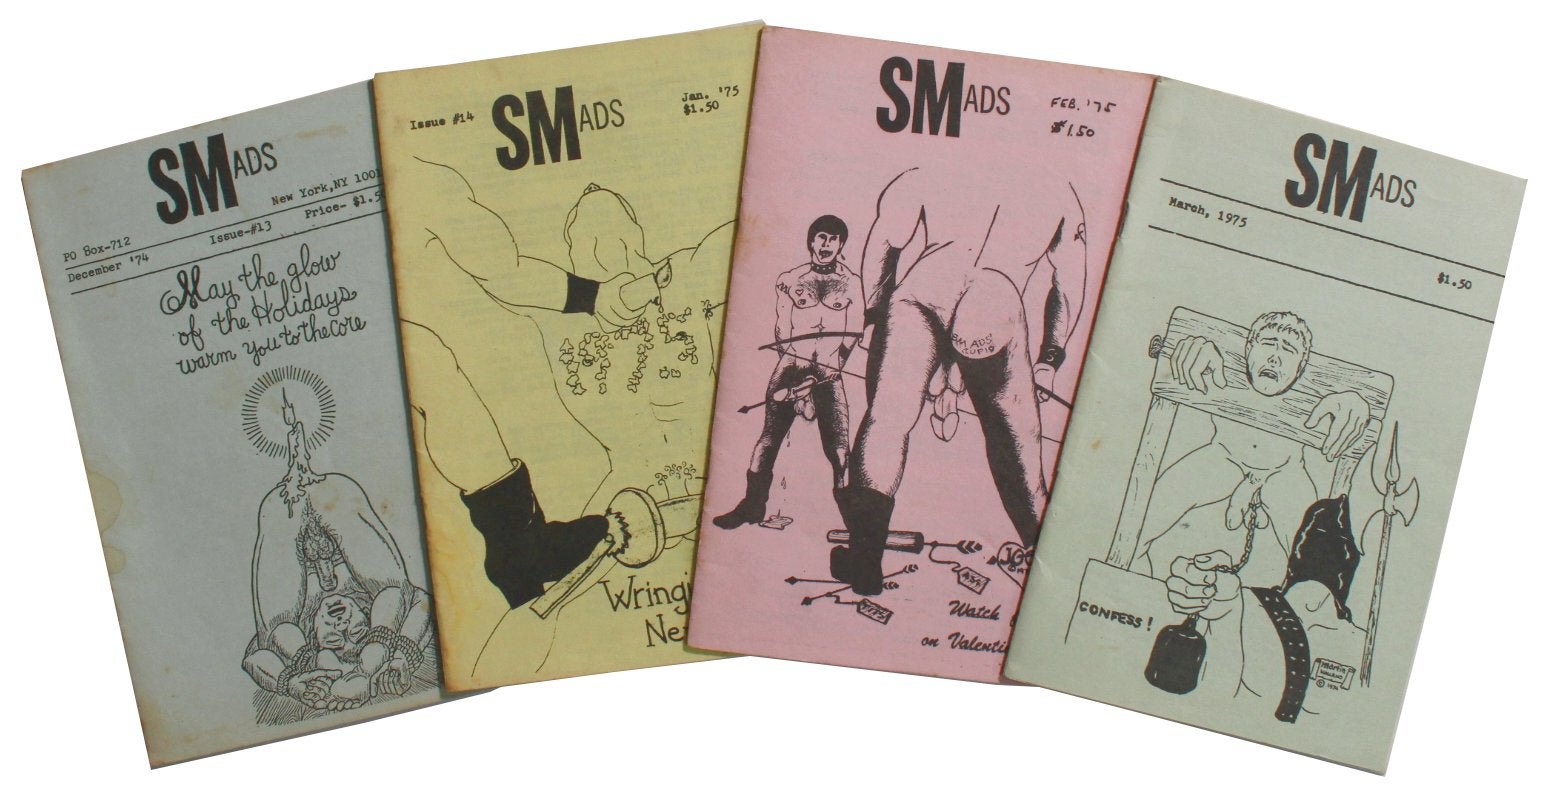 SMads. [Run of Four Issues. Martin of Holland, artist.